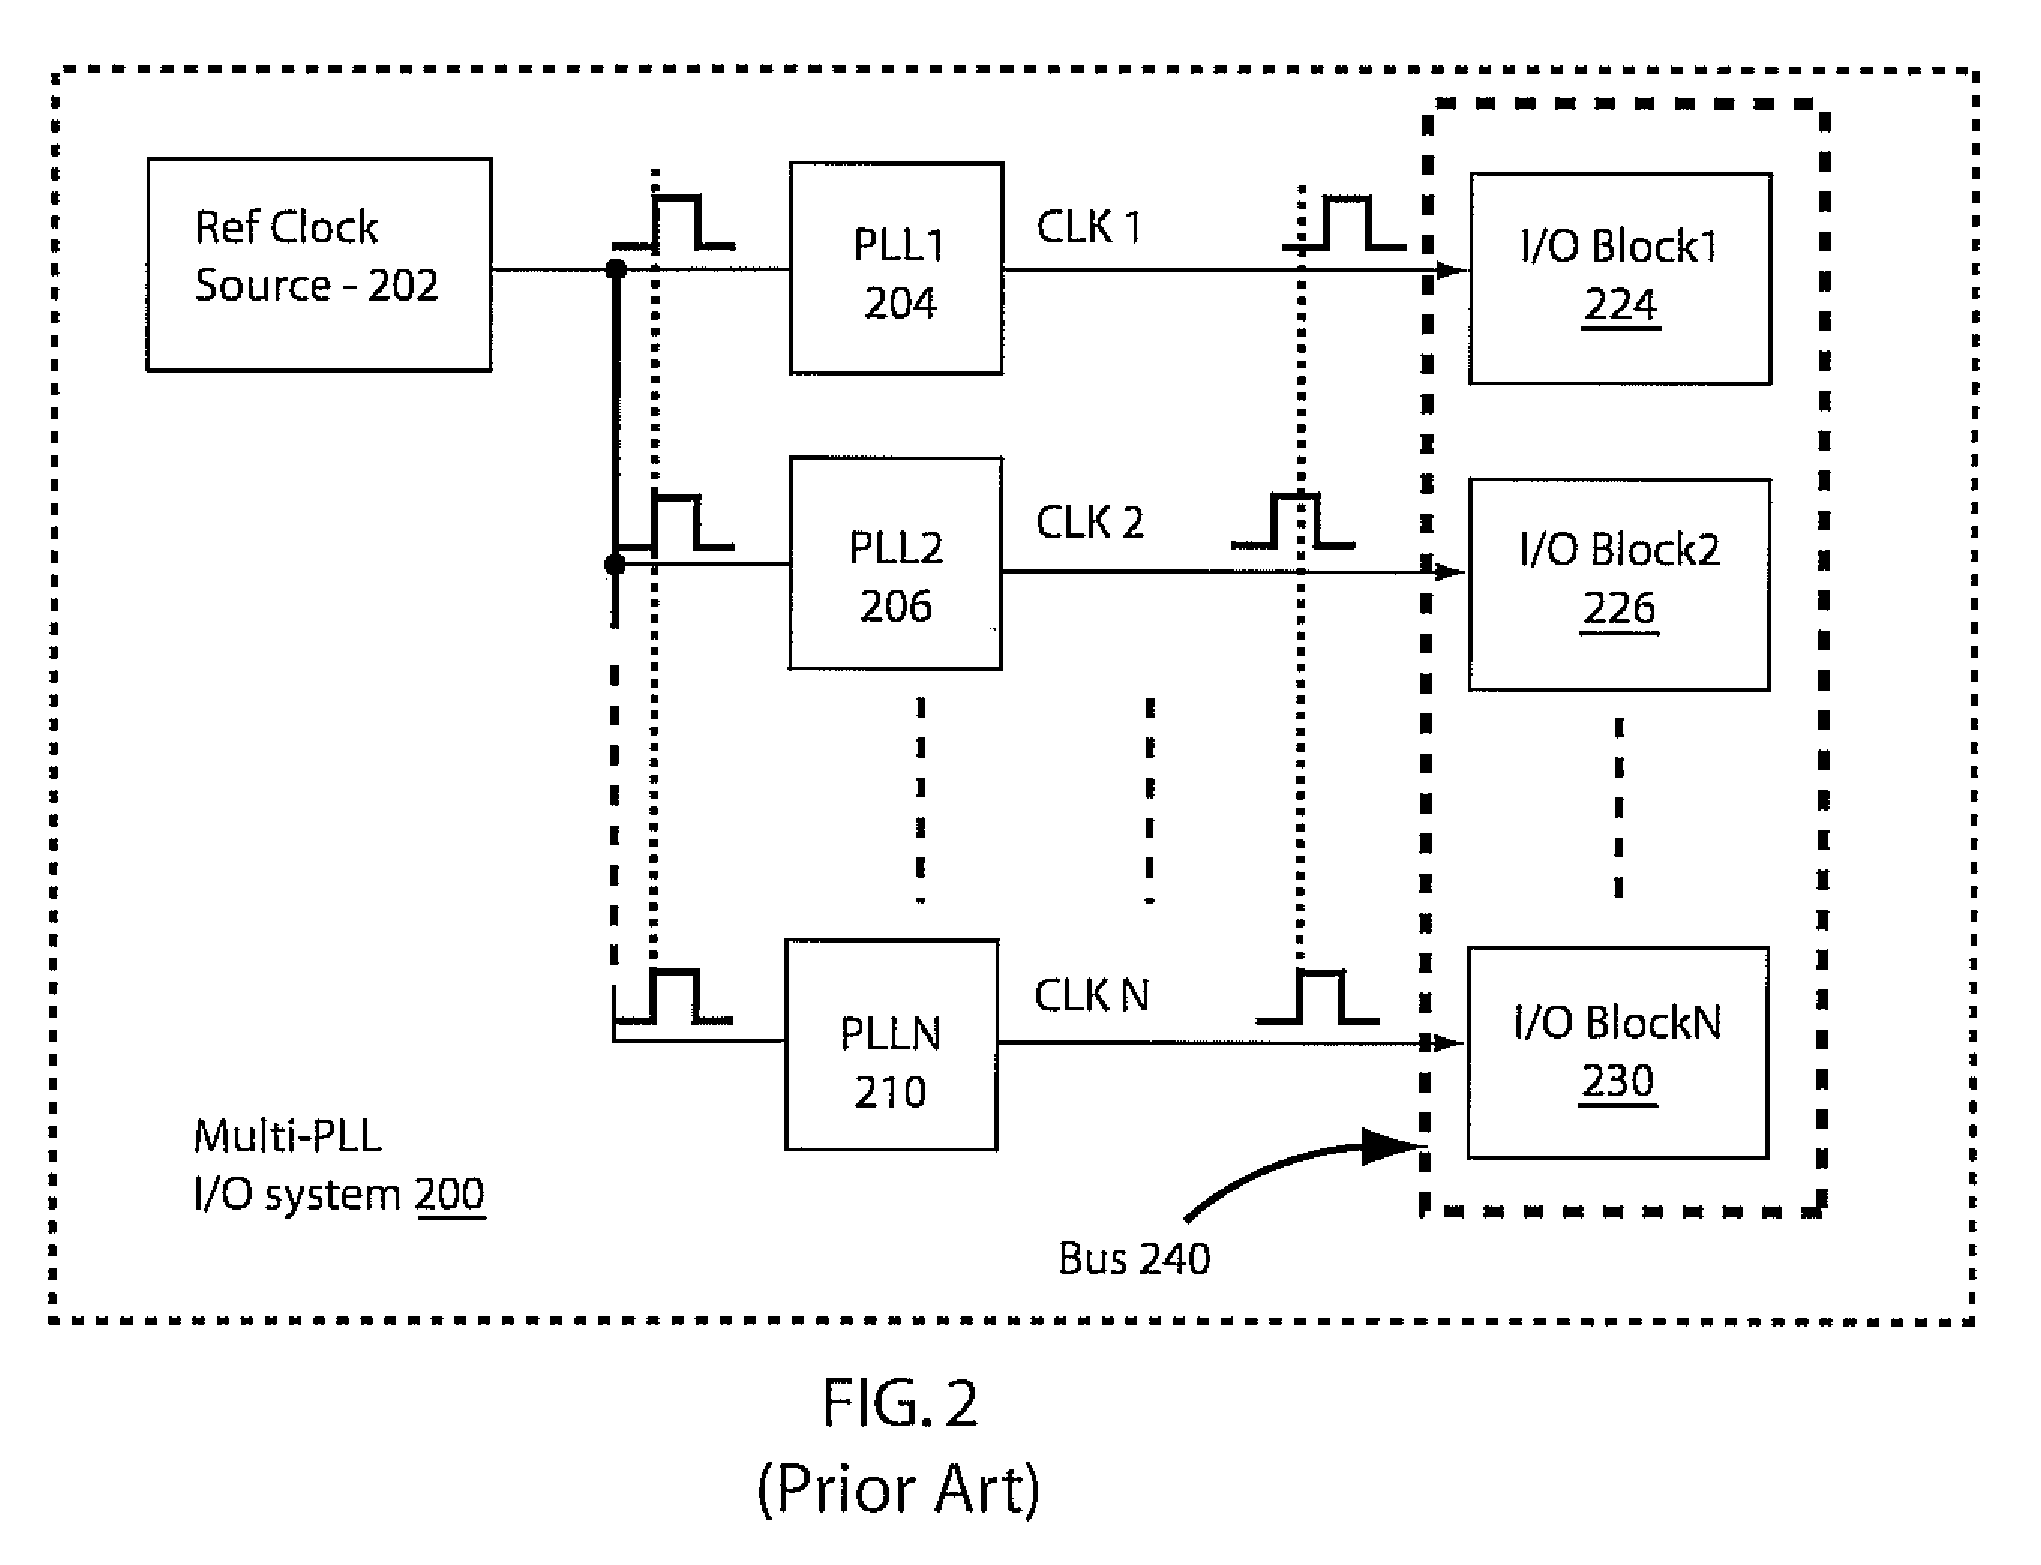 Automatic static phase error and jitter compensation in PLL circuits